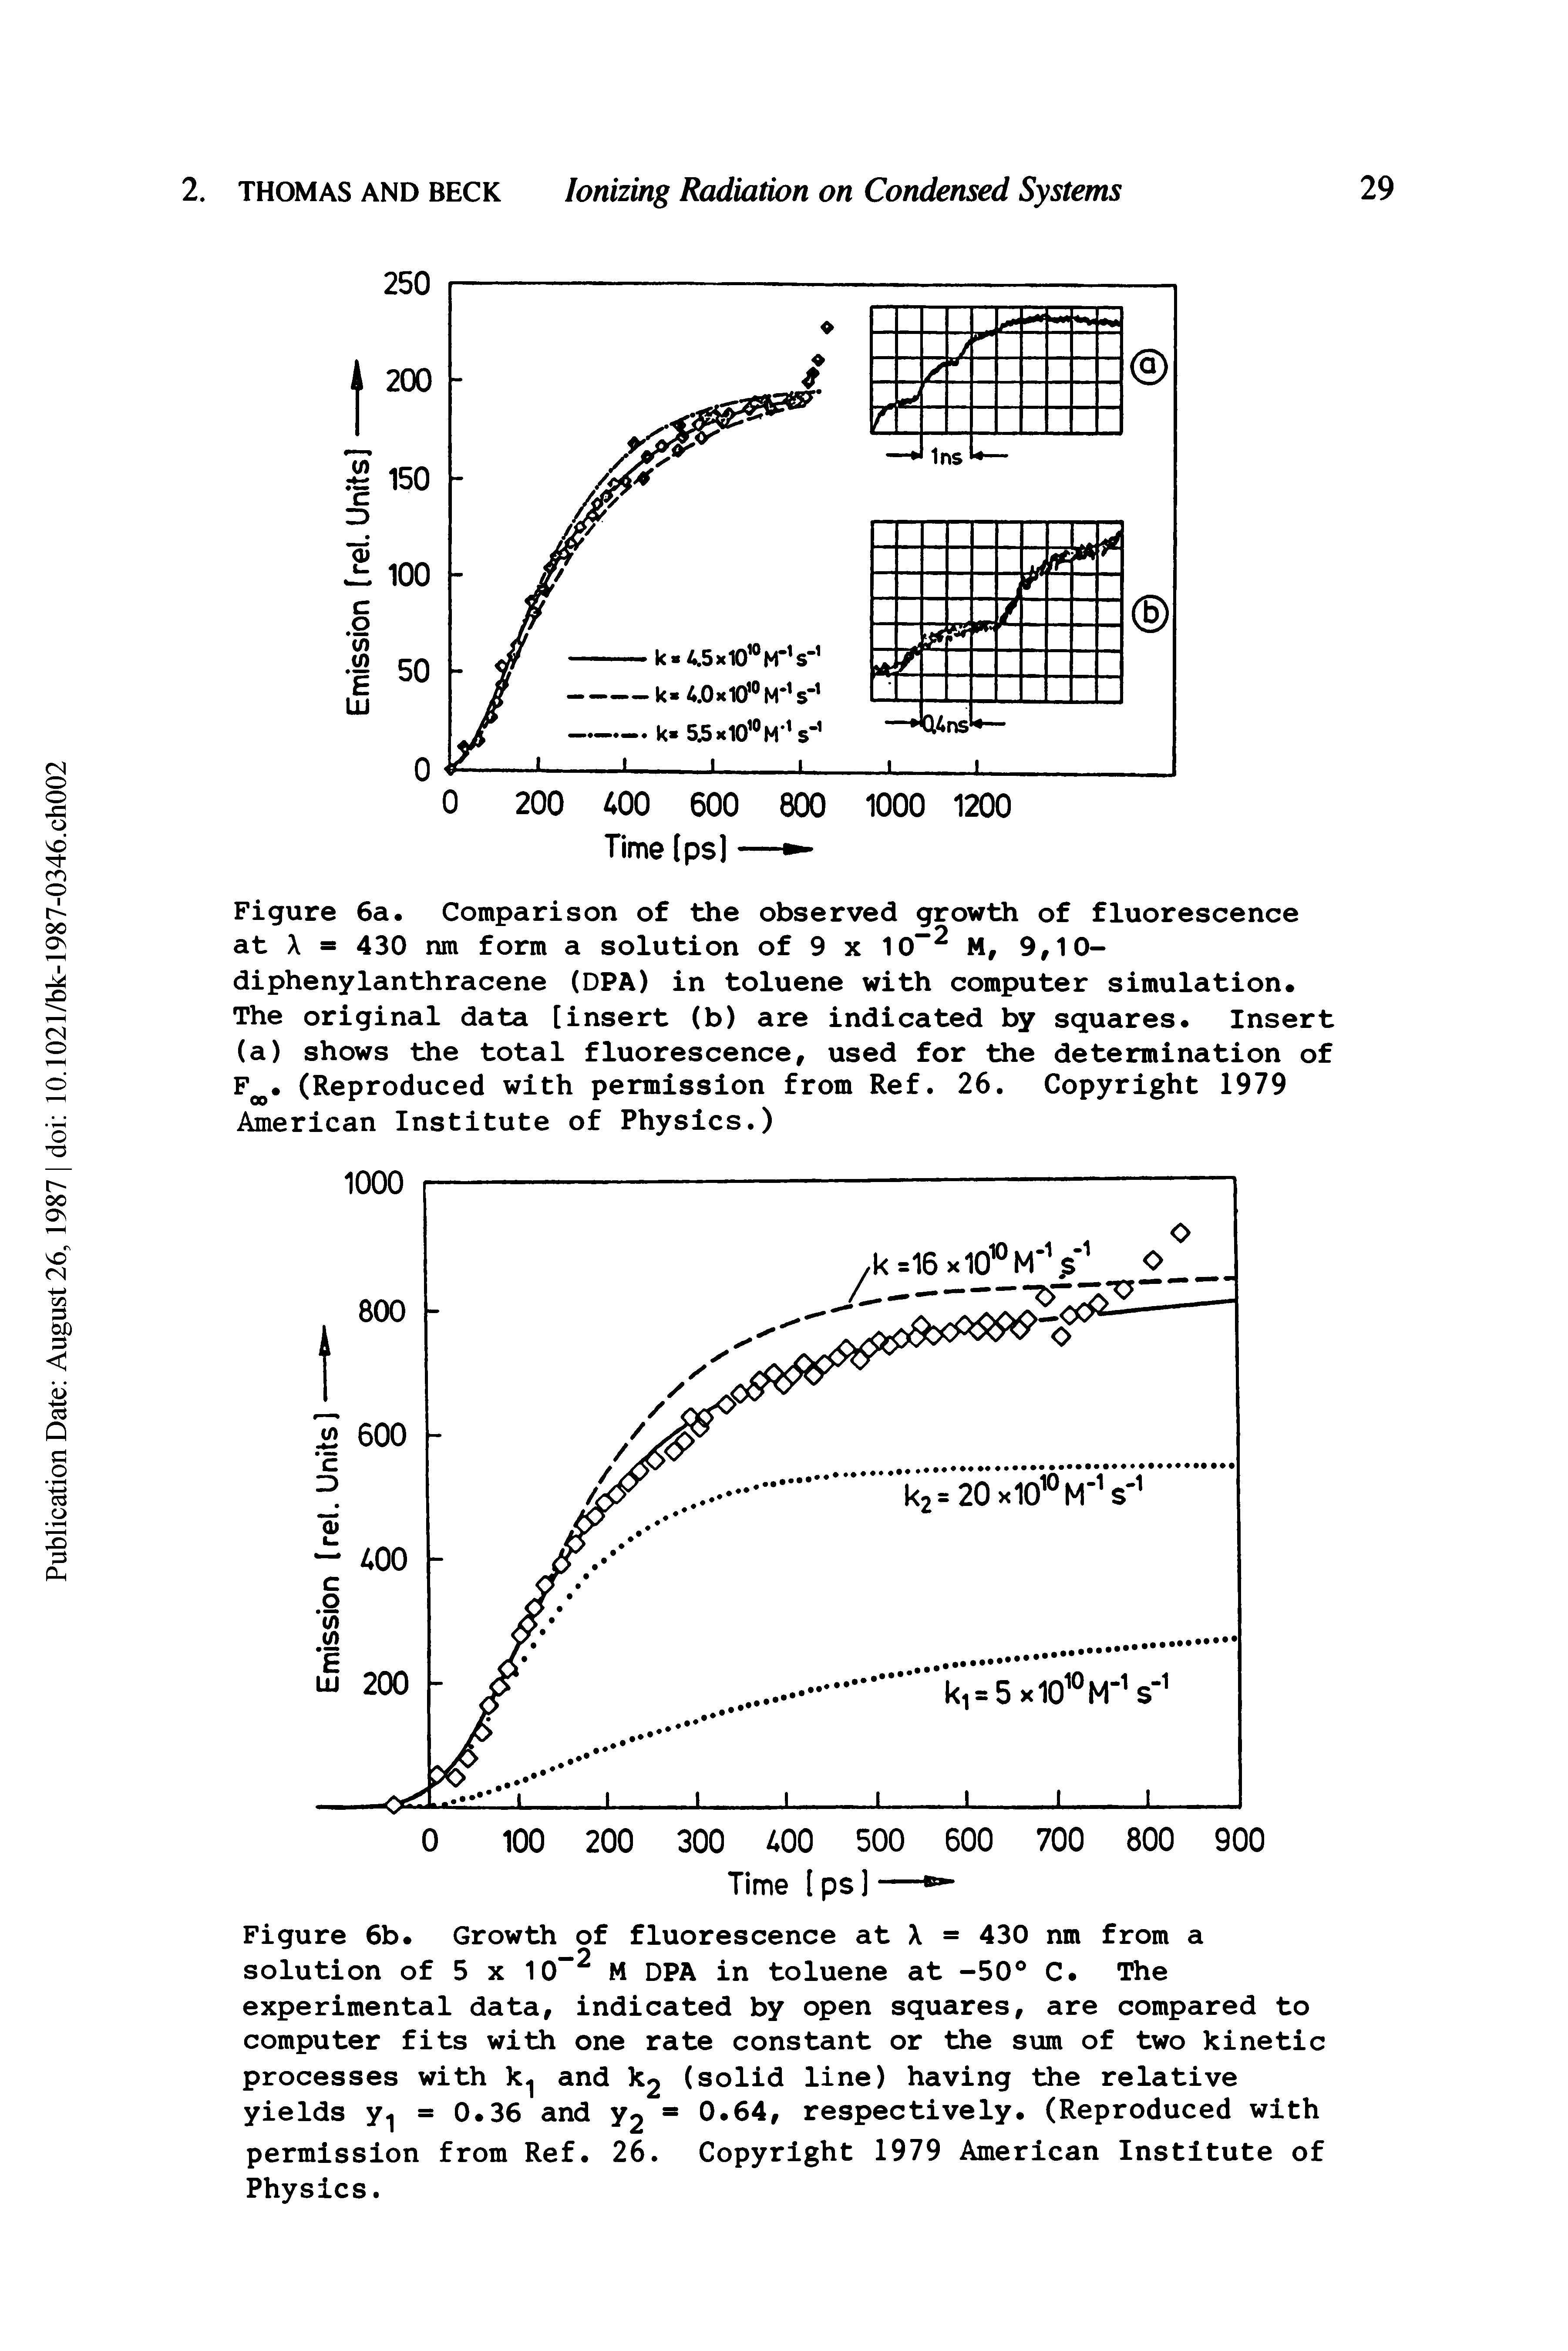 Figure 6b. Growth of fluorescence at X = 430 nm from a solution of 5 X 10 M DPA in toluene at -50 C. The experimental data, indicated by open squares, are compared to computer fits with one rate constant or the sum of two kinetic processes with and 1 2 (solid line) having the relative yields y = 0.36 and Y2 = 0.64, respectively. (Reproduced with permission from Ref. 26. Copyright 1979 American Institute of Physics.